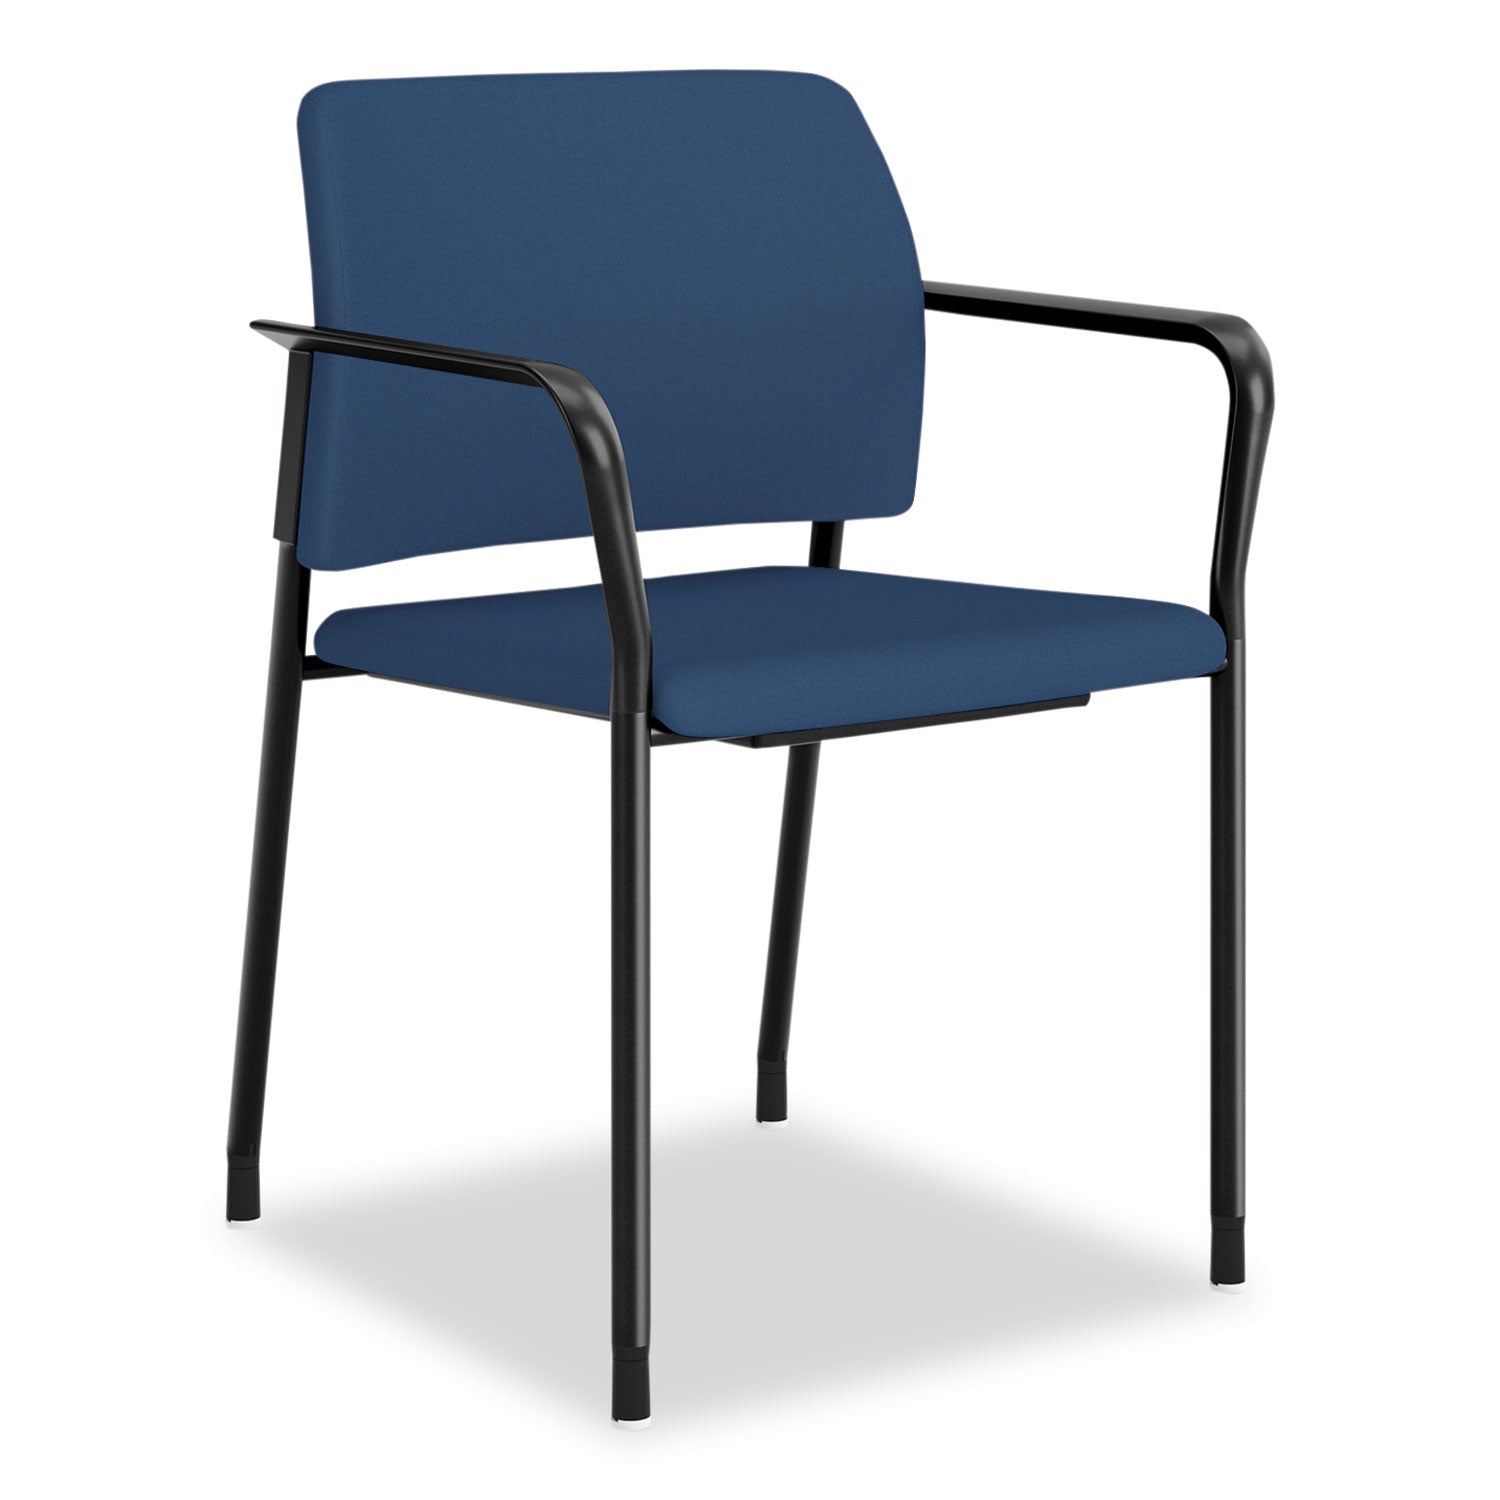 accommodate-series-guest-chair-with-arms-vinyl-upholstery-235-x-2225-x-32-elysian-seat-back-charblack-legs-2-carton_honsgs6fbsx04cb - 2